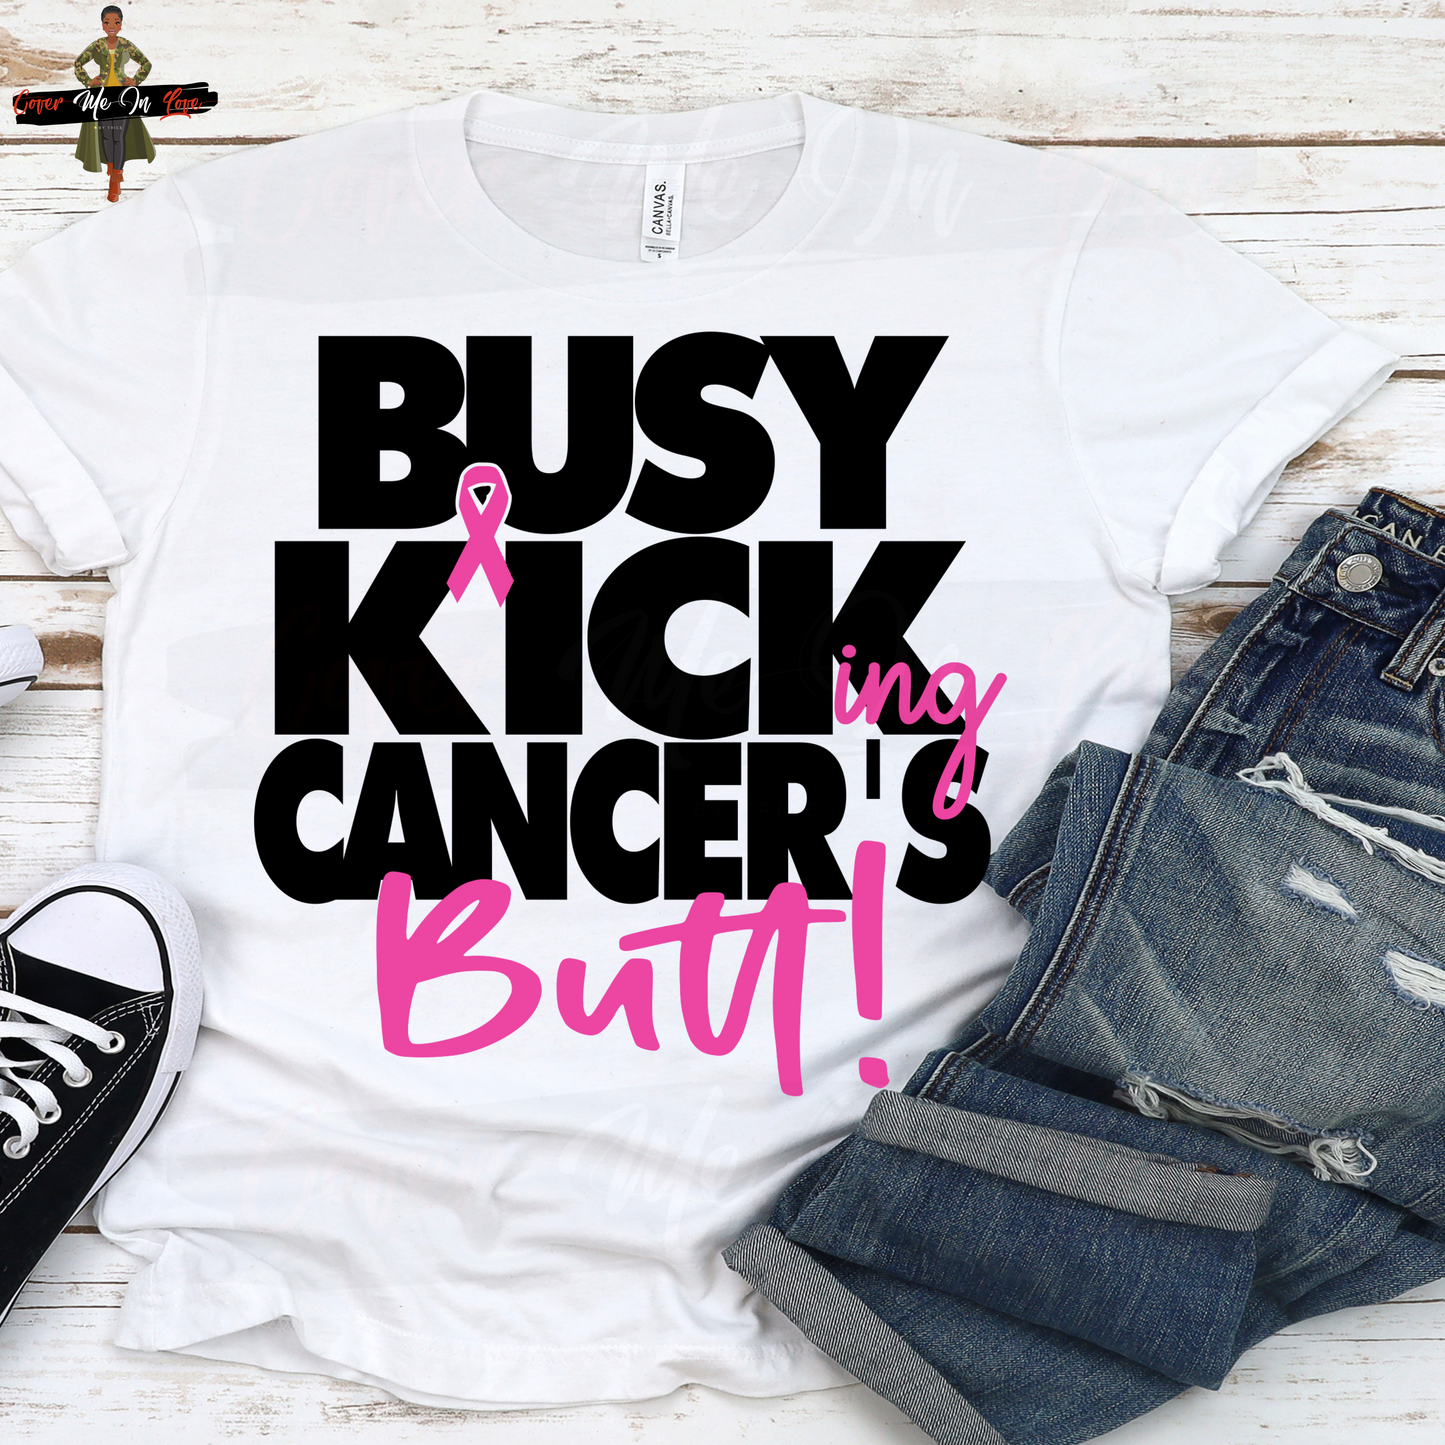 Busy Kicking Cancer's Butt!